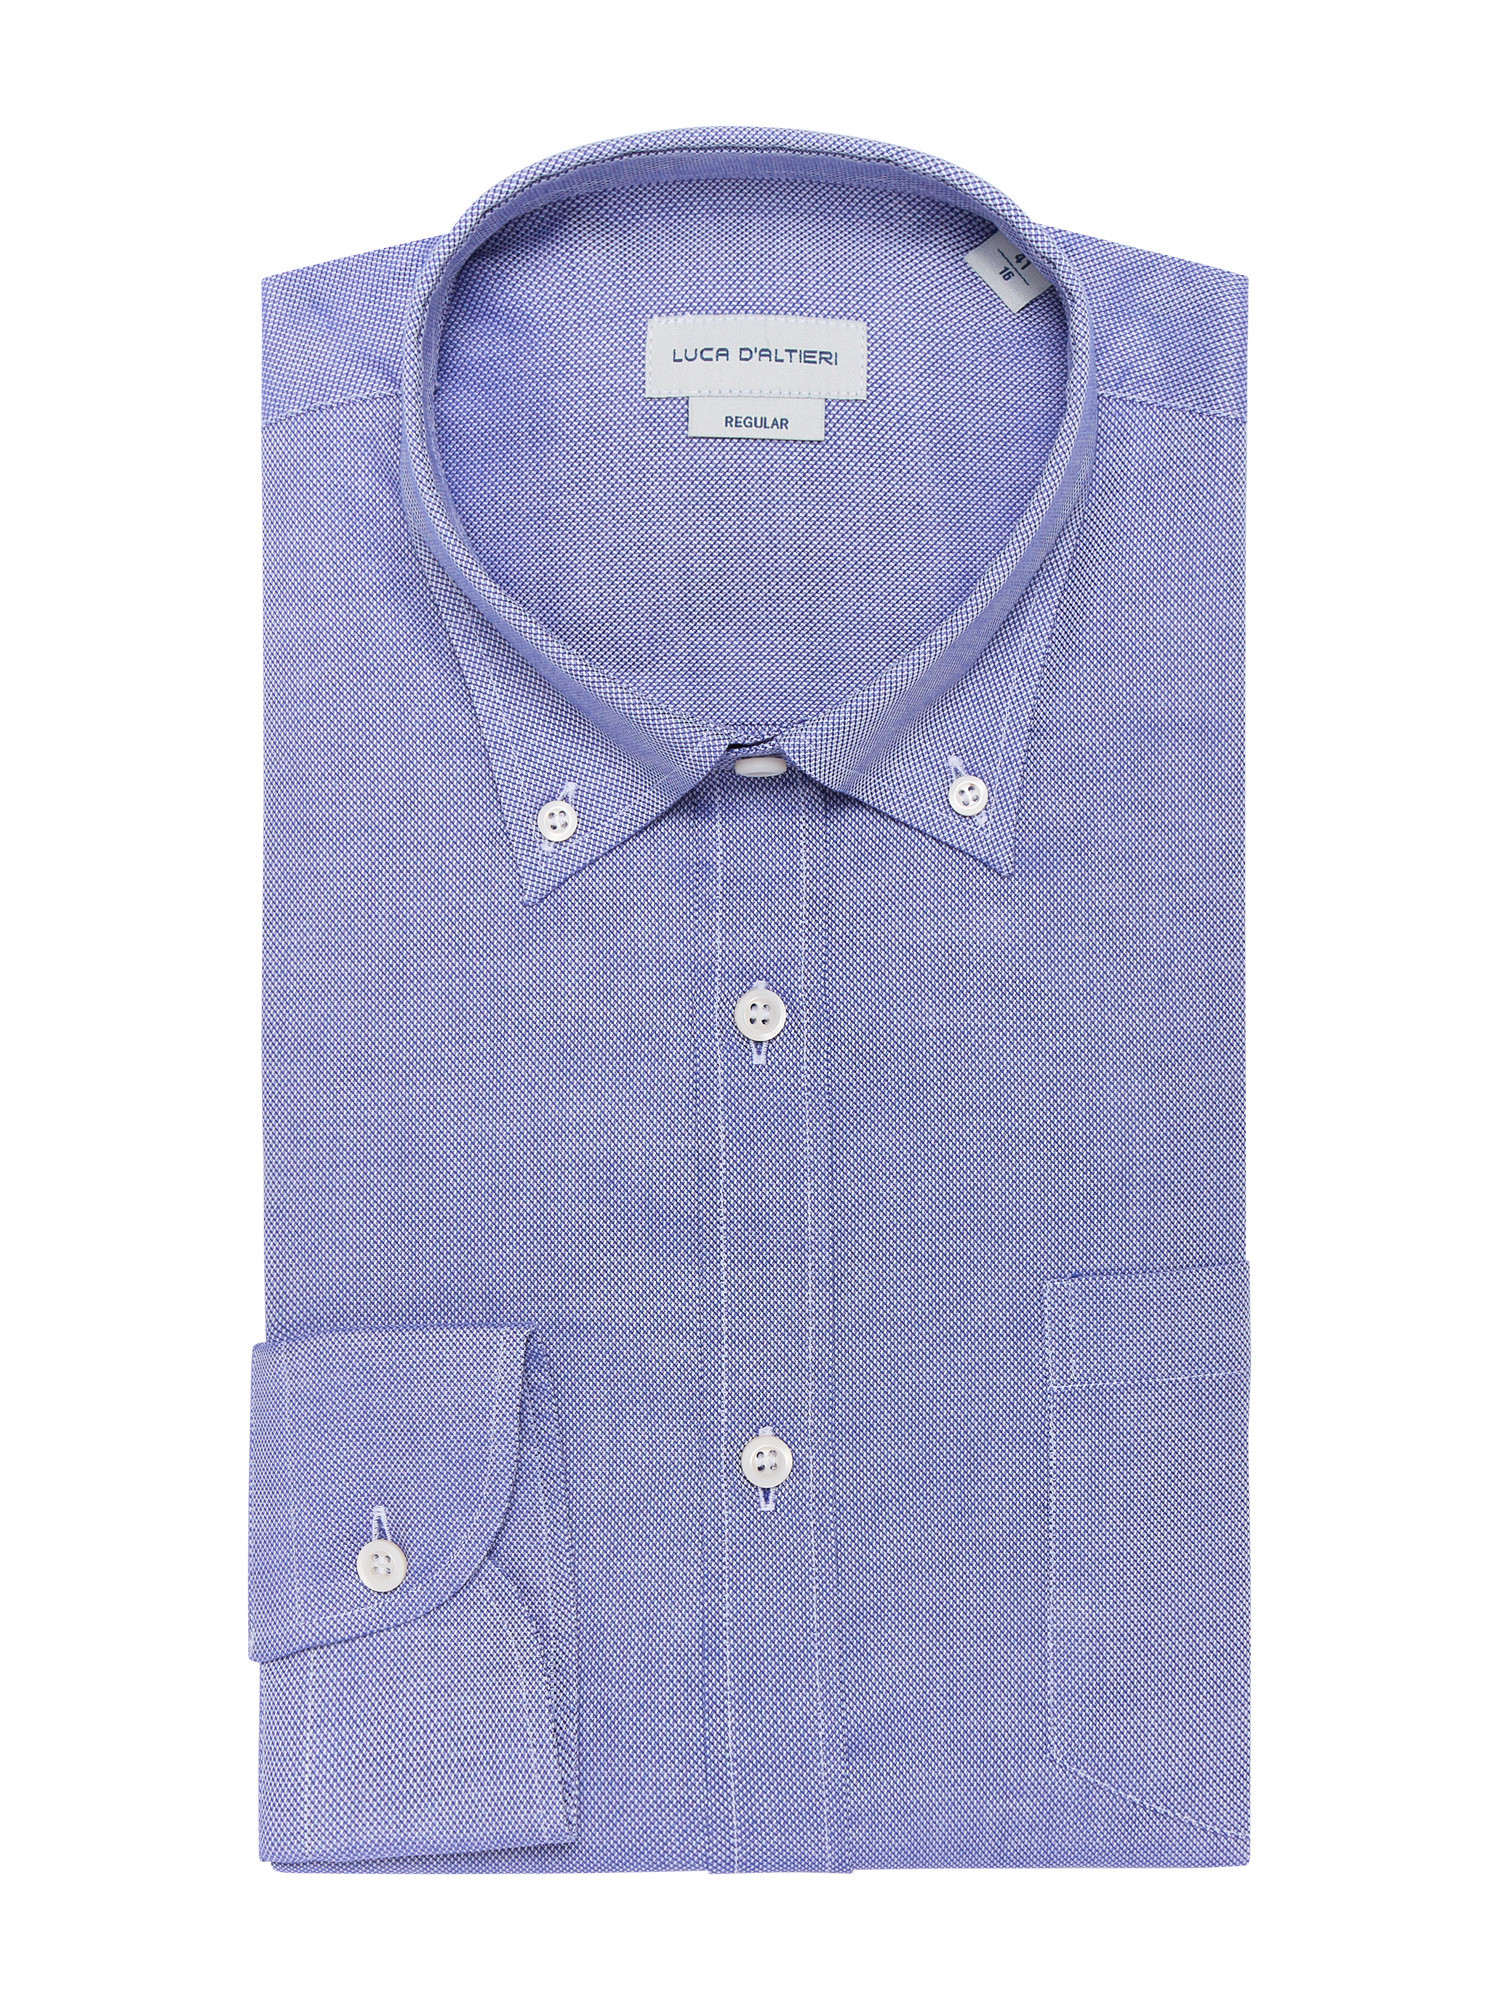 Luca D'Altieri - Regular fit chasuble shirt in pure textured cotton, Light Blue, large image number 0